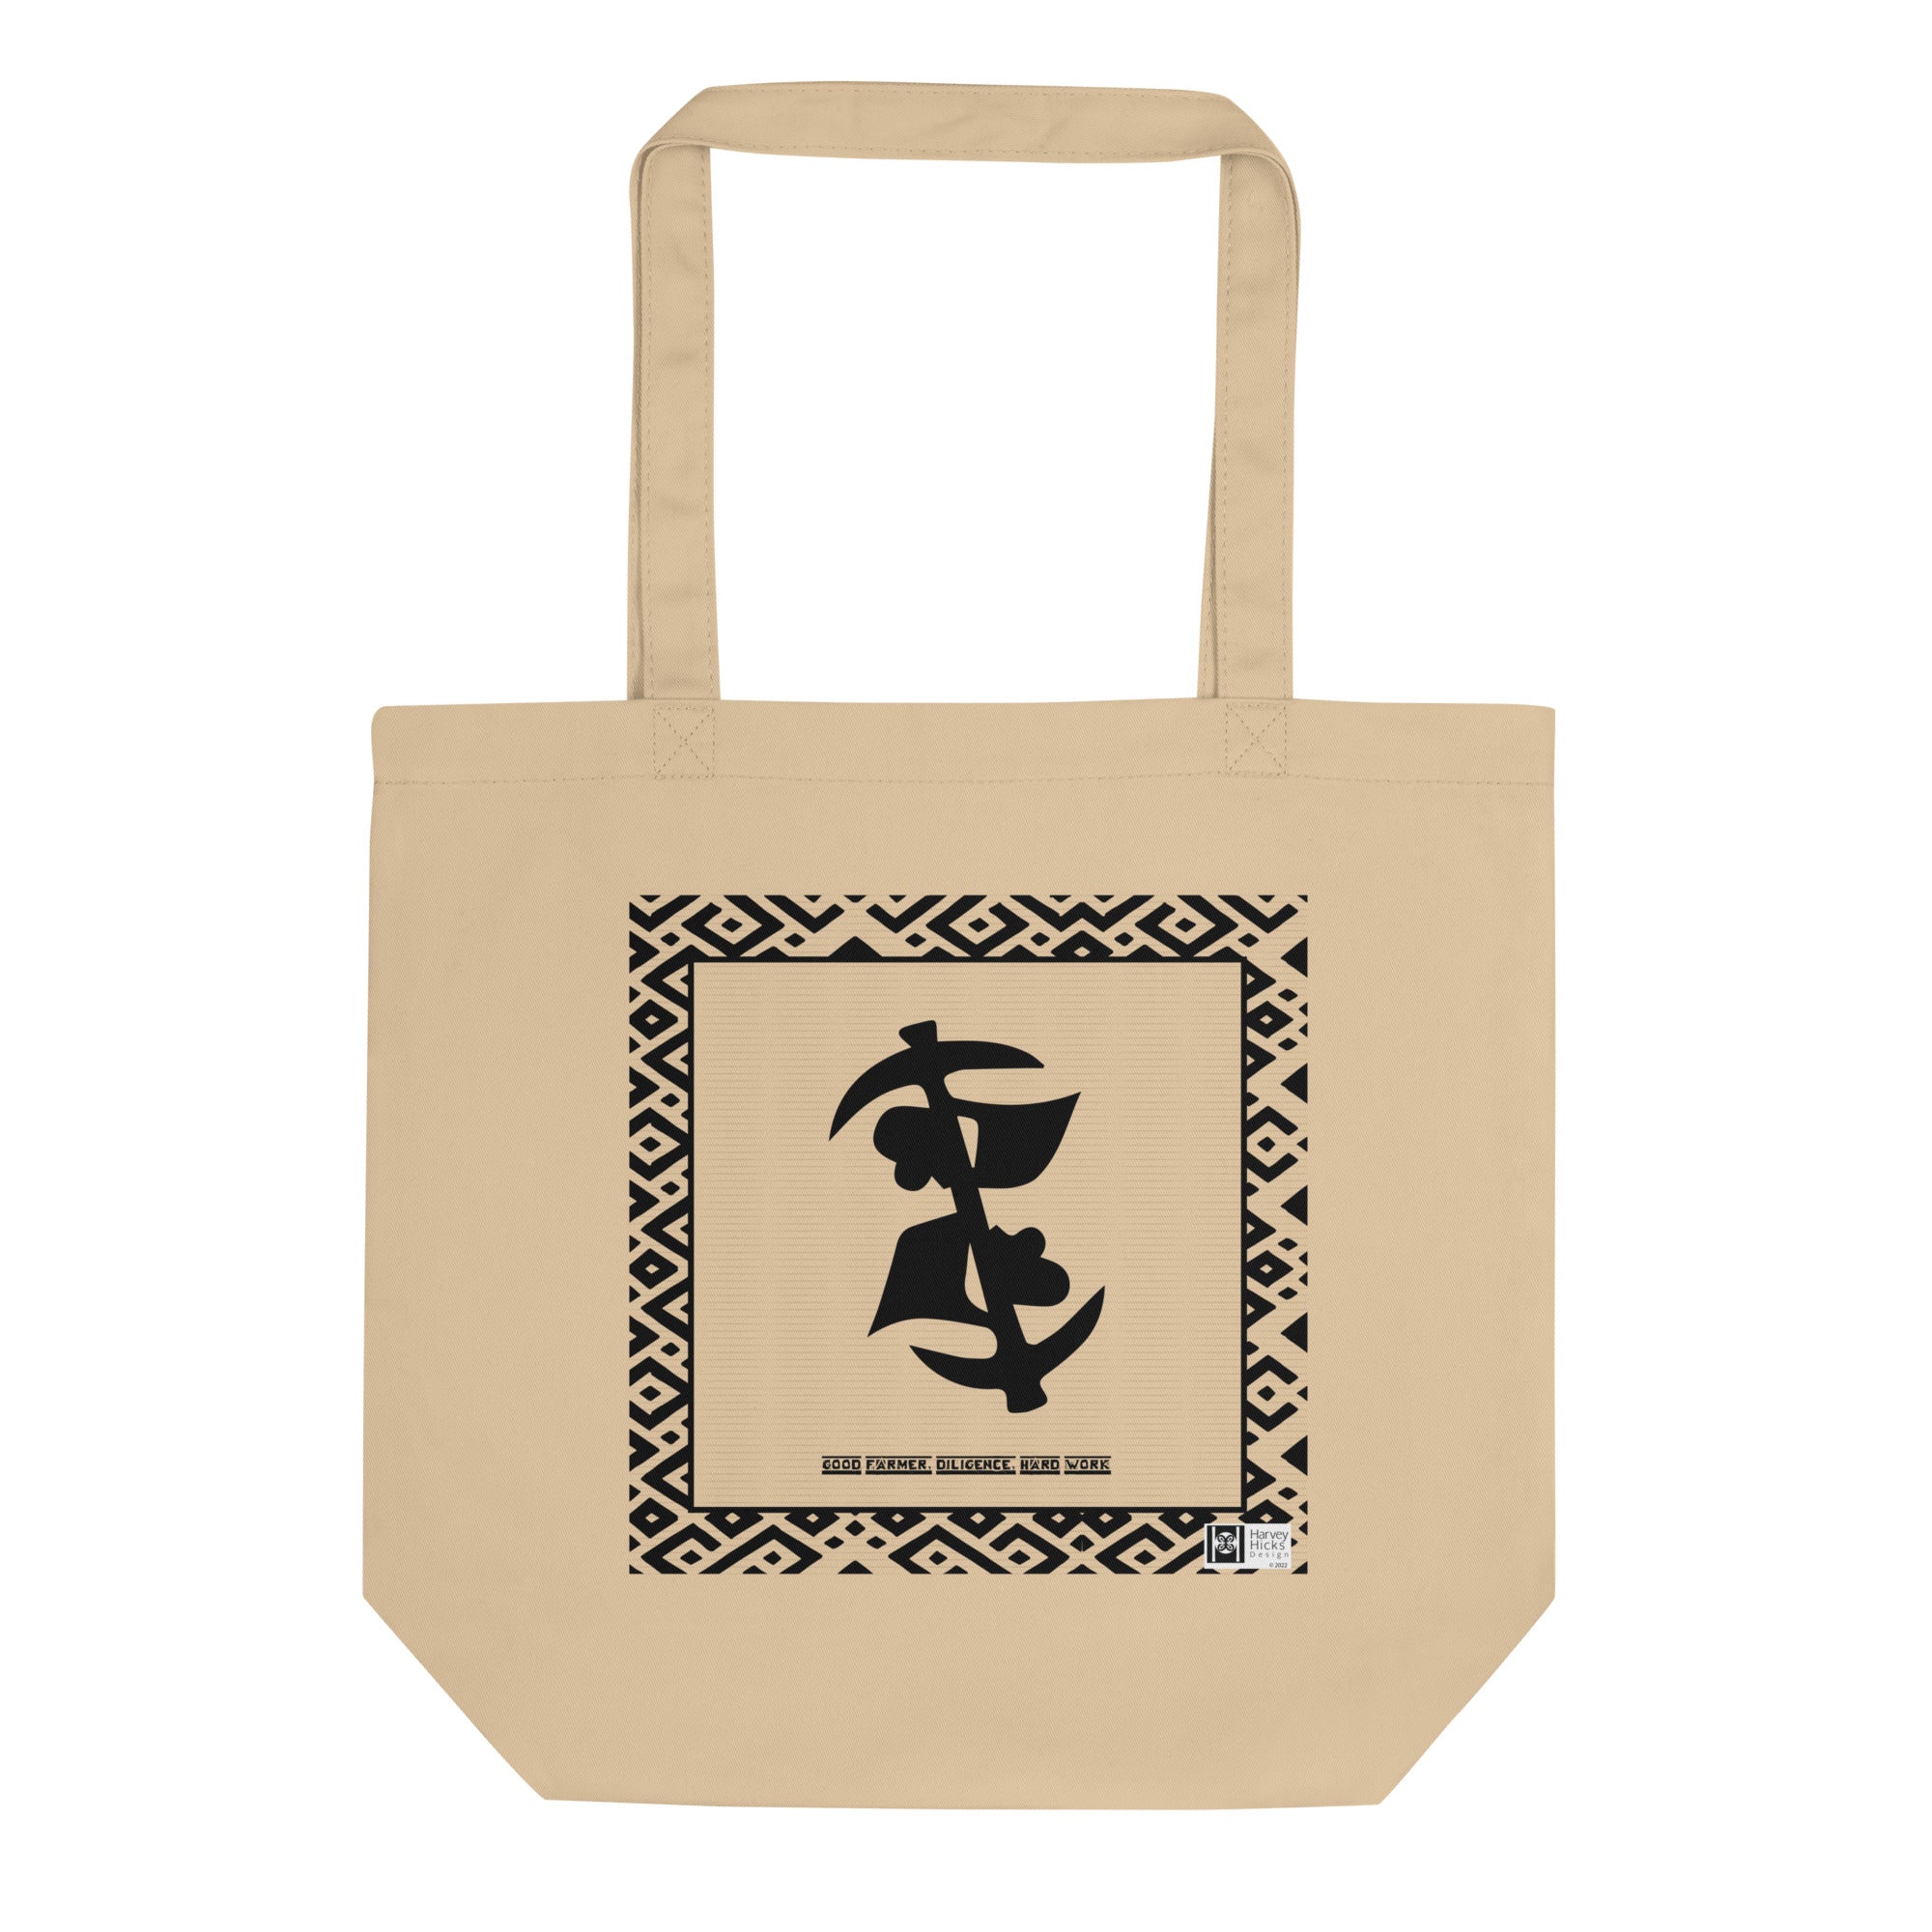 100% cotton Eco Tote Bag, featuring the Adinkra symbol for diligence and persistence